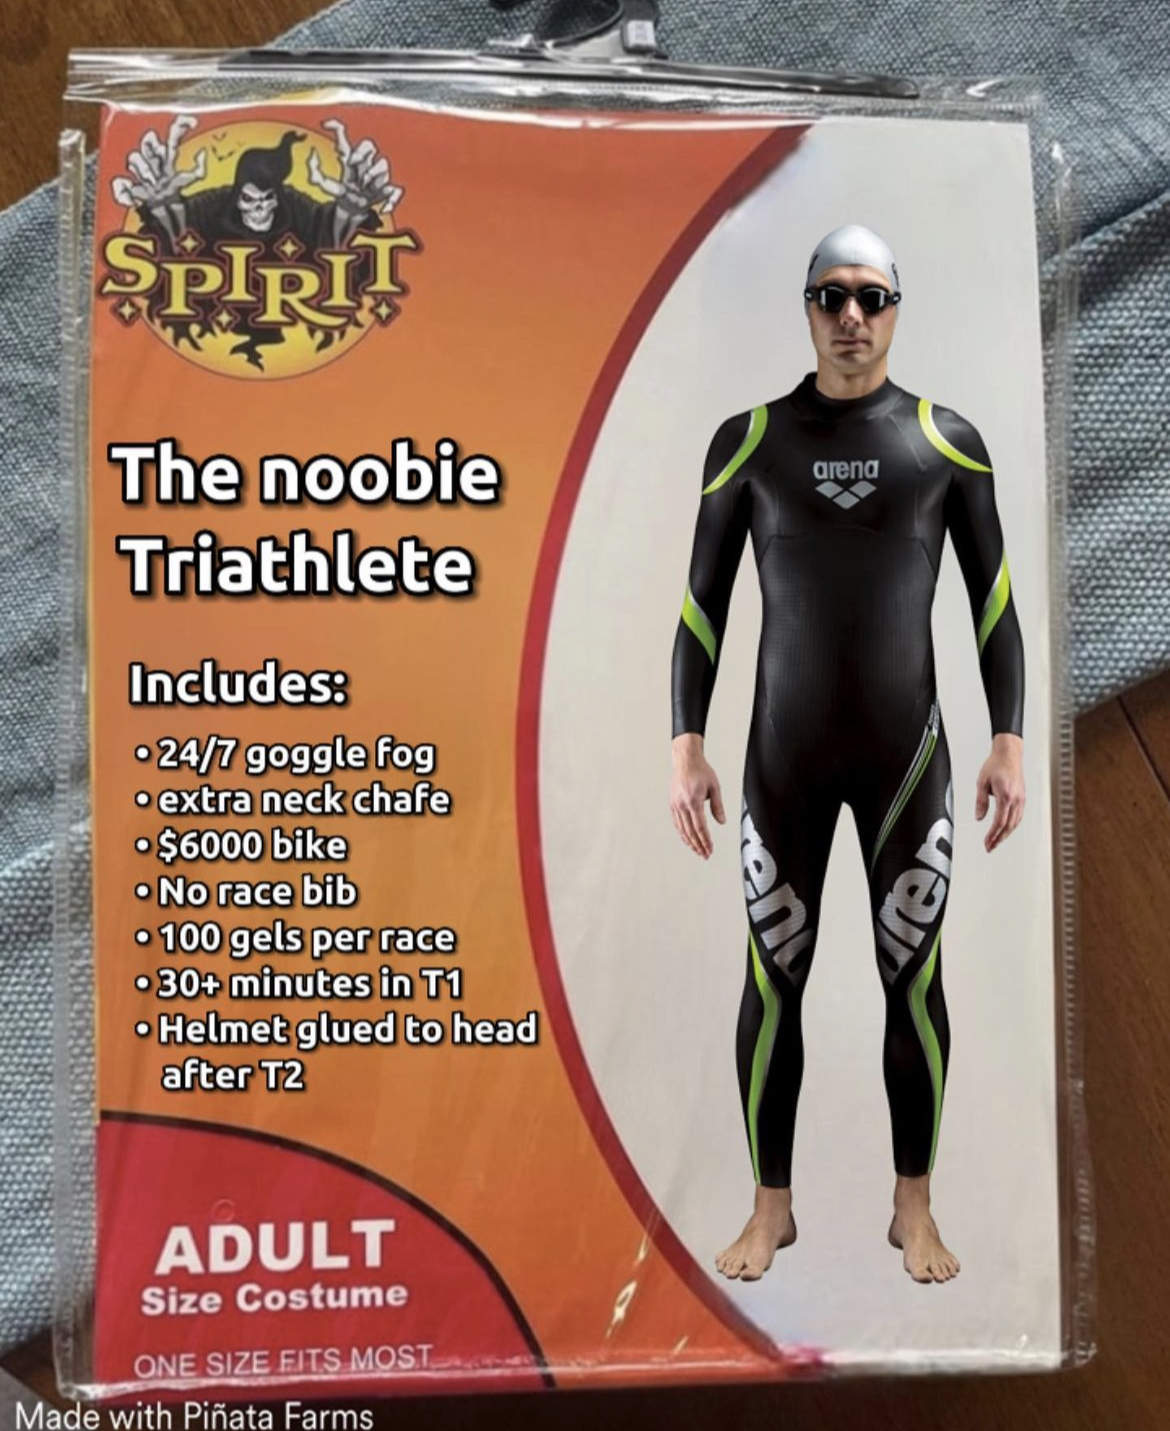 Costume Memes - spirit halloween - Spirit The noobie Triathlete Includes 247 goggle fog o extra neck chafe $6000 bike No race bib 100 gels per race 30 minutes in T1 Helmet glued to head after T2 Adult Size Costume One Size Fits Most Made with Piata Farms 